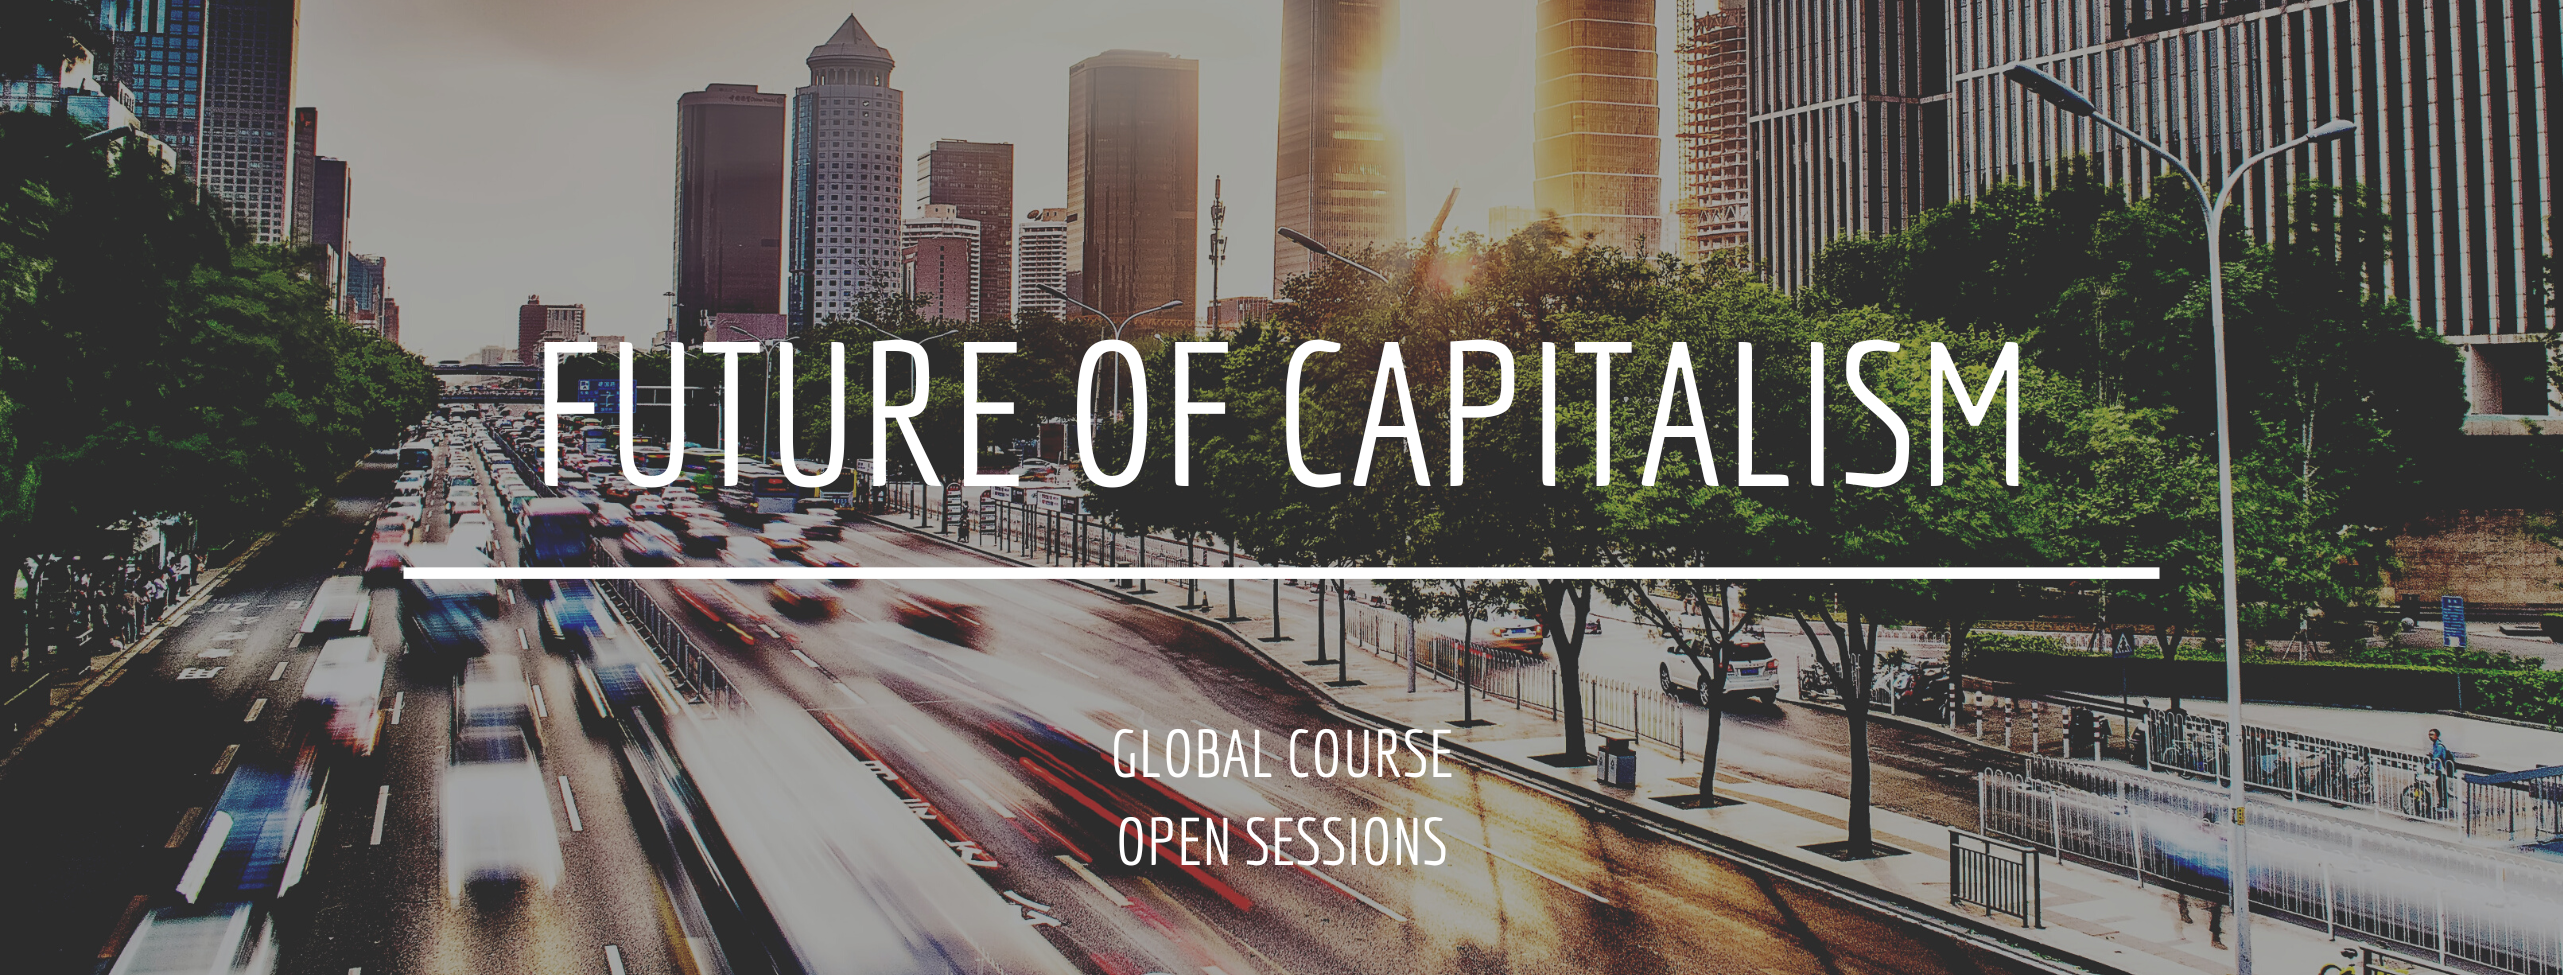 [Forum] “Future of Capitalism”  open session series